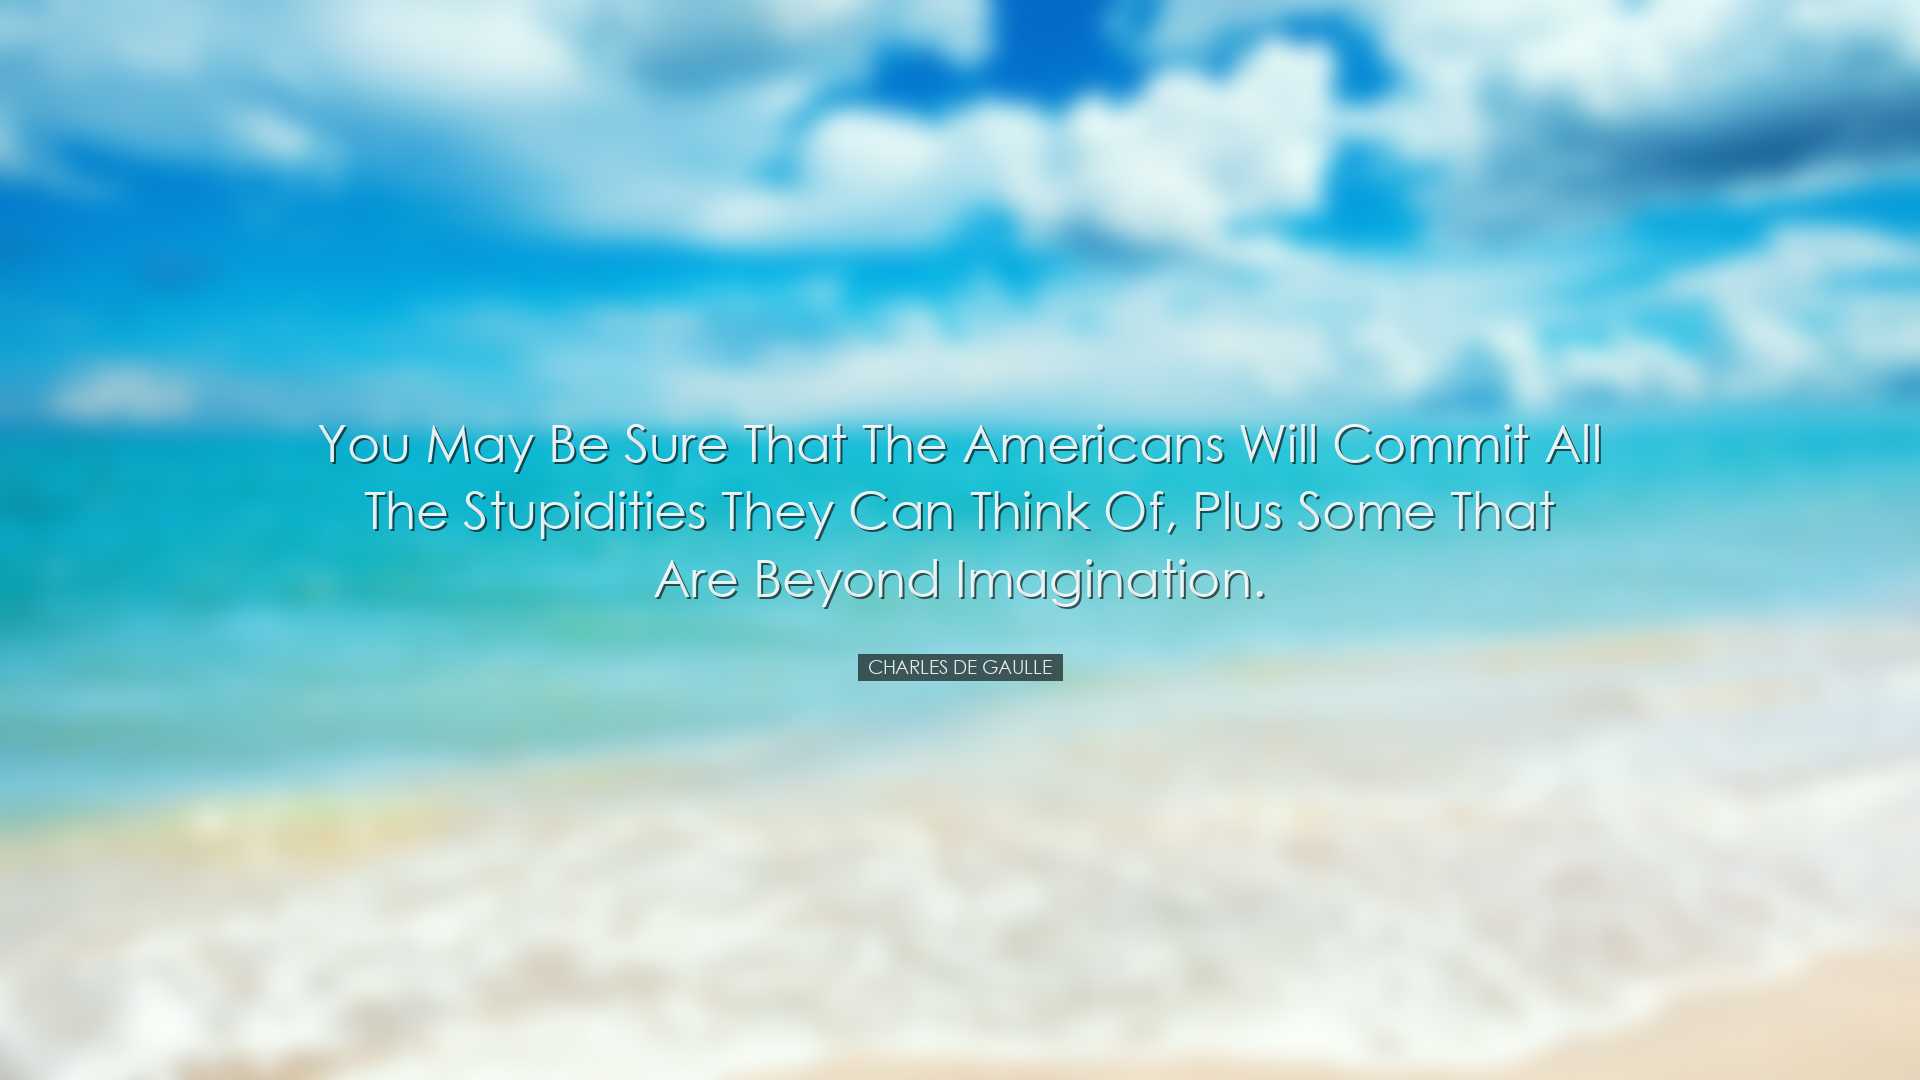 You may be sure that the Americans will commit all the stupidities